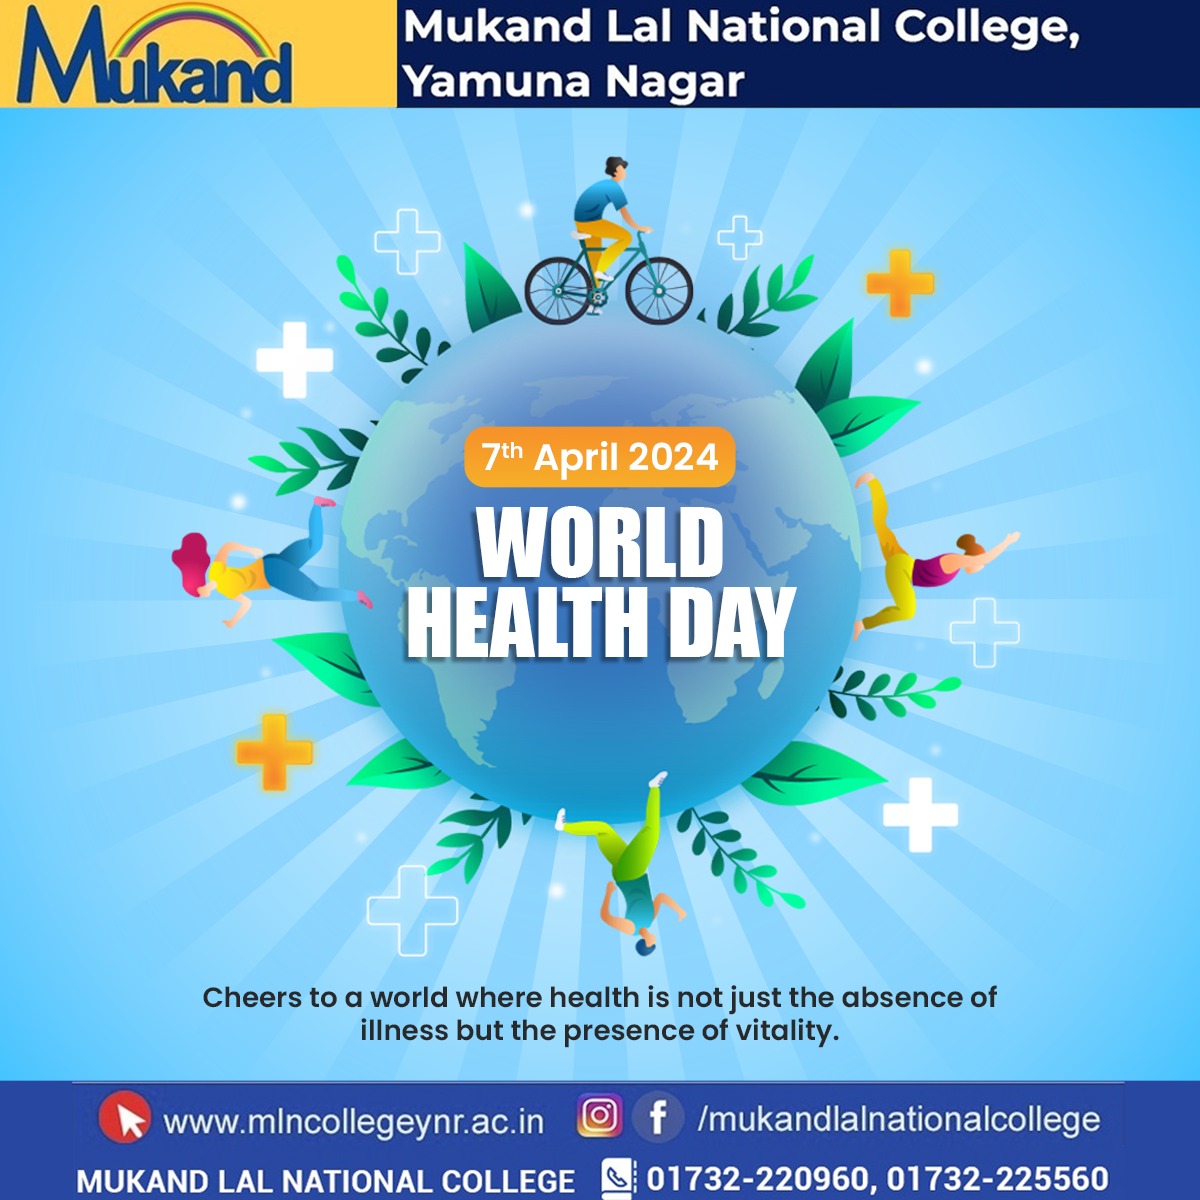 This World Health Day, let's prioritize mental health and well-being, because a healthy mind is just as important as a healthy body.

Happy World Health Day! 🏥🌍

.

.

.

#worldhealthday #healthday #healthiswealth #health #healthybody #healthymind #healthylife #mln #mlncollege